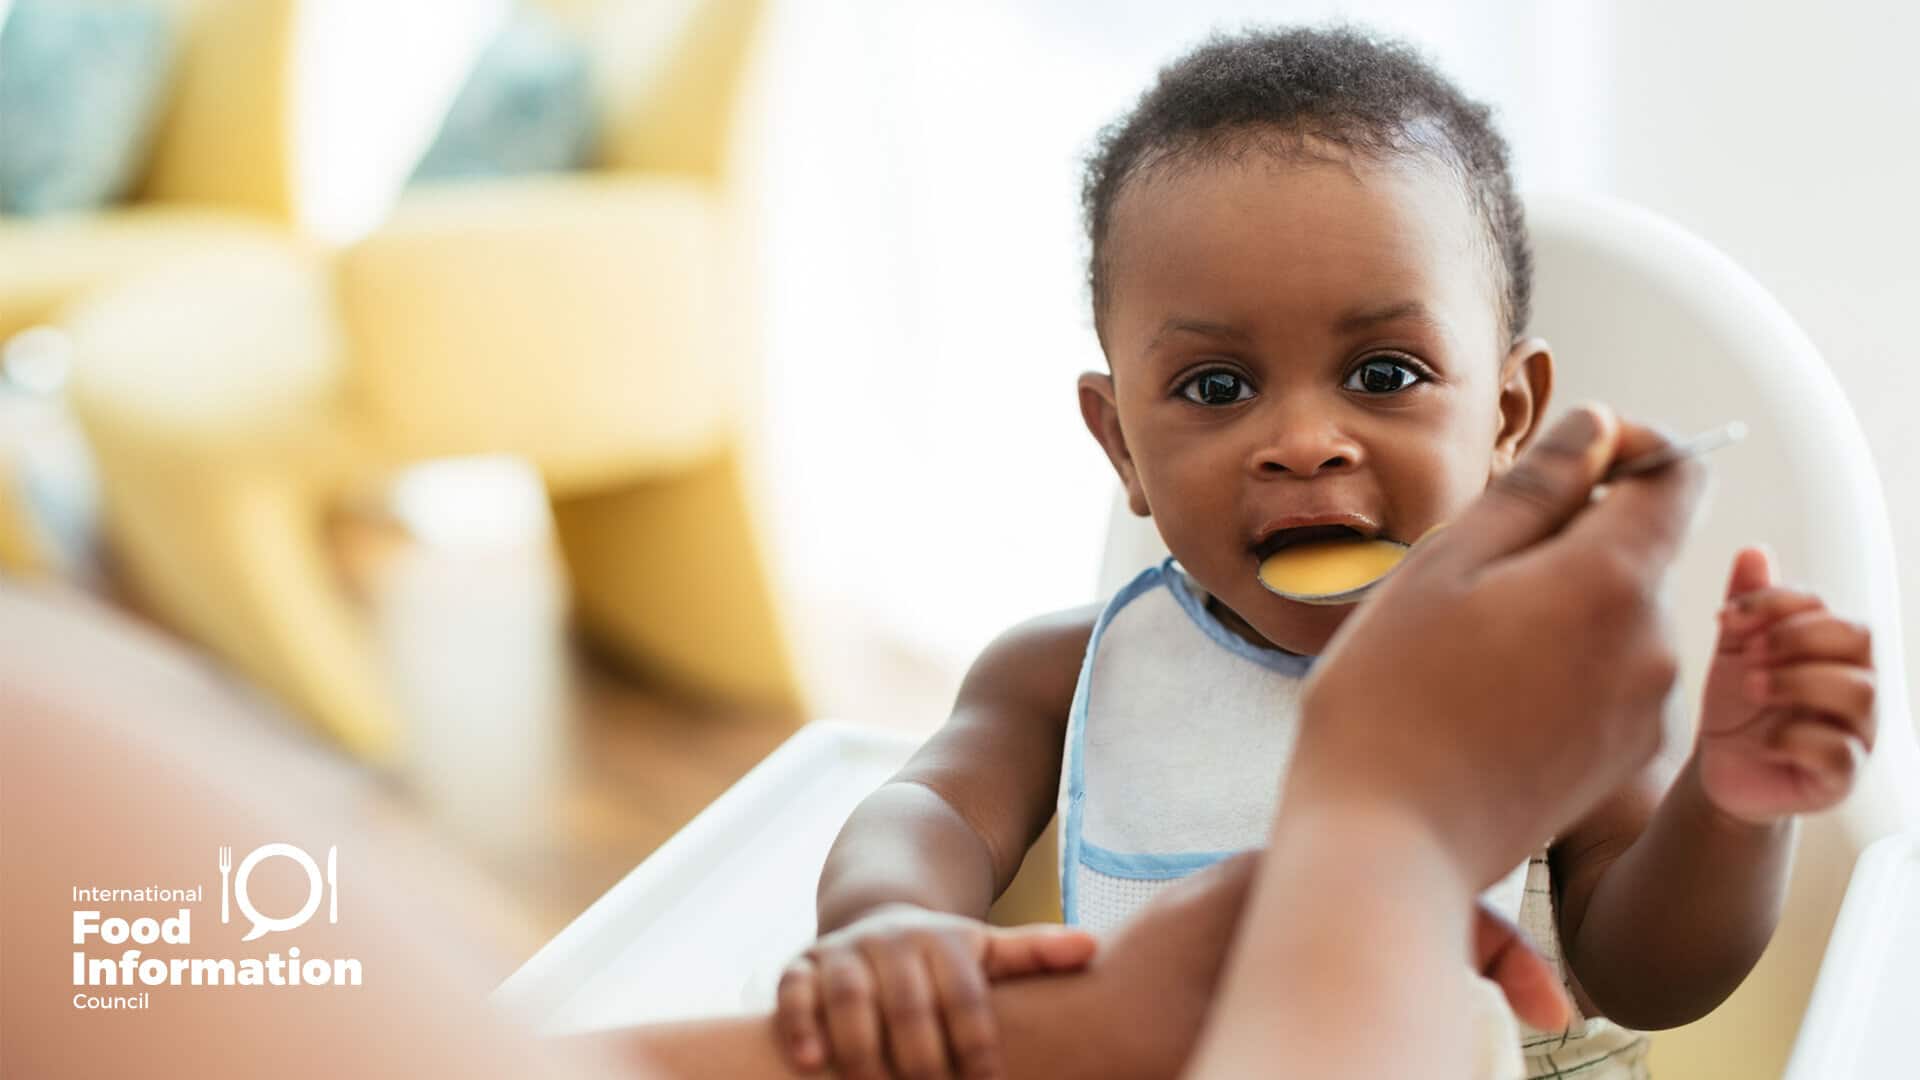 Everything You Need to Buy When Your Baby Starts Solids